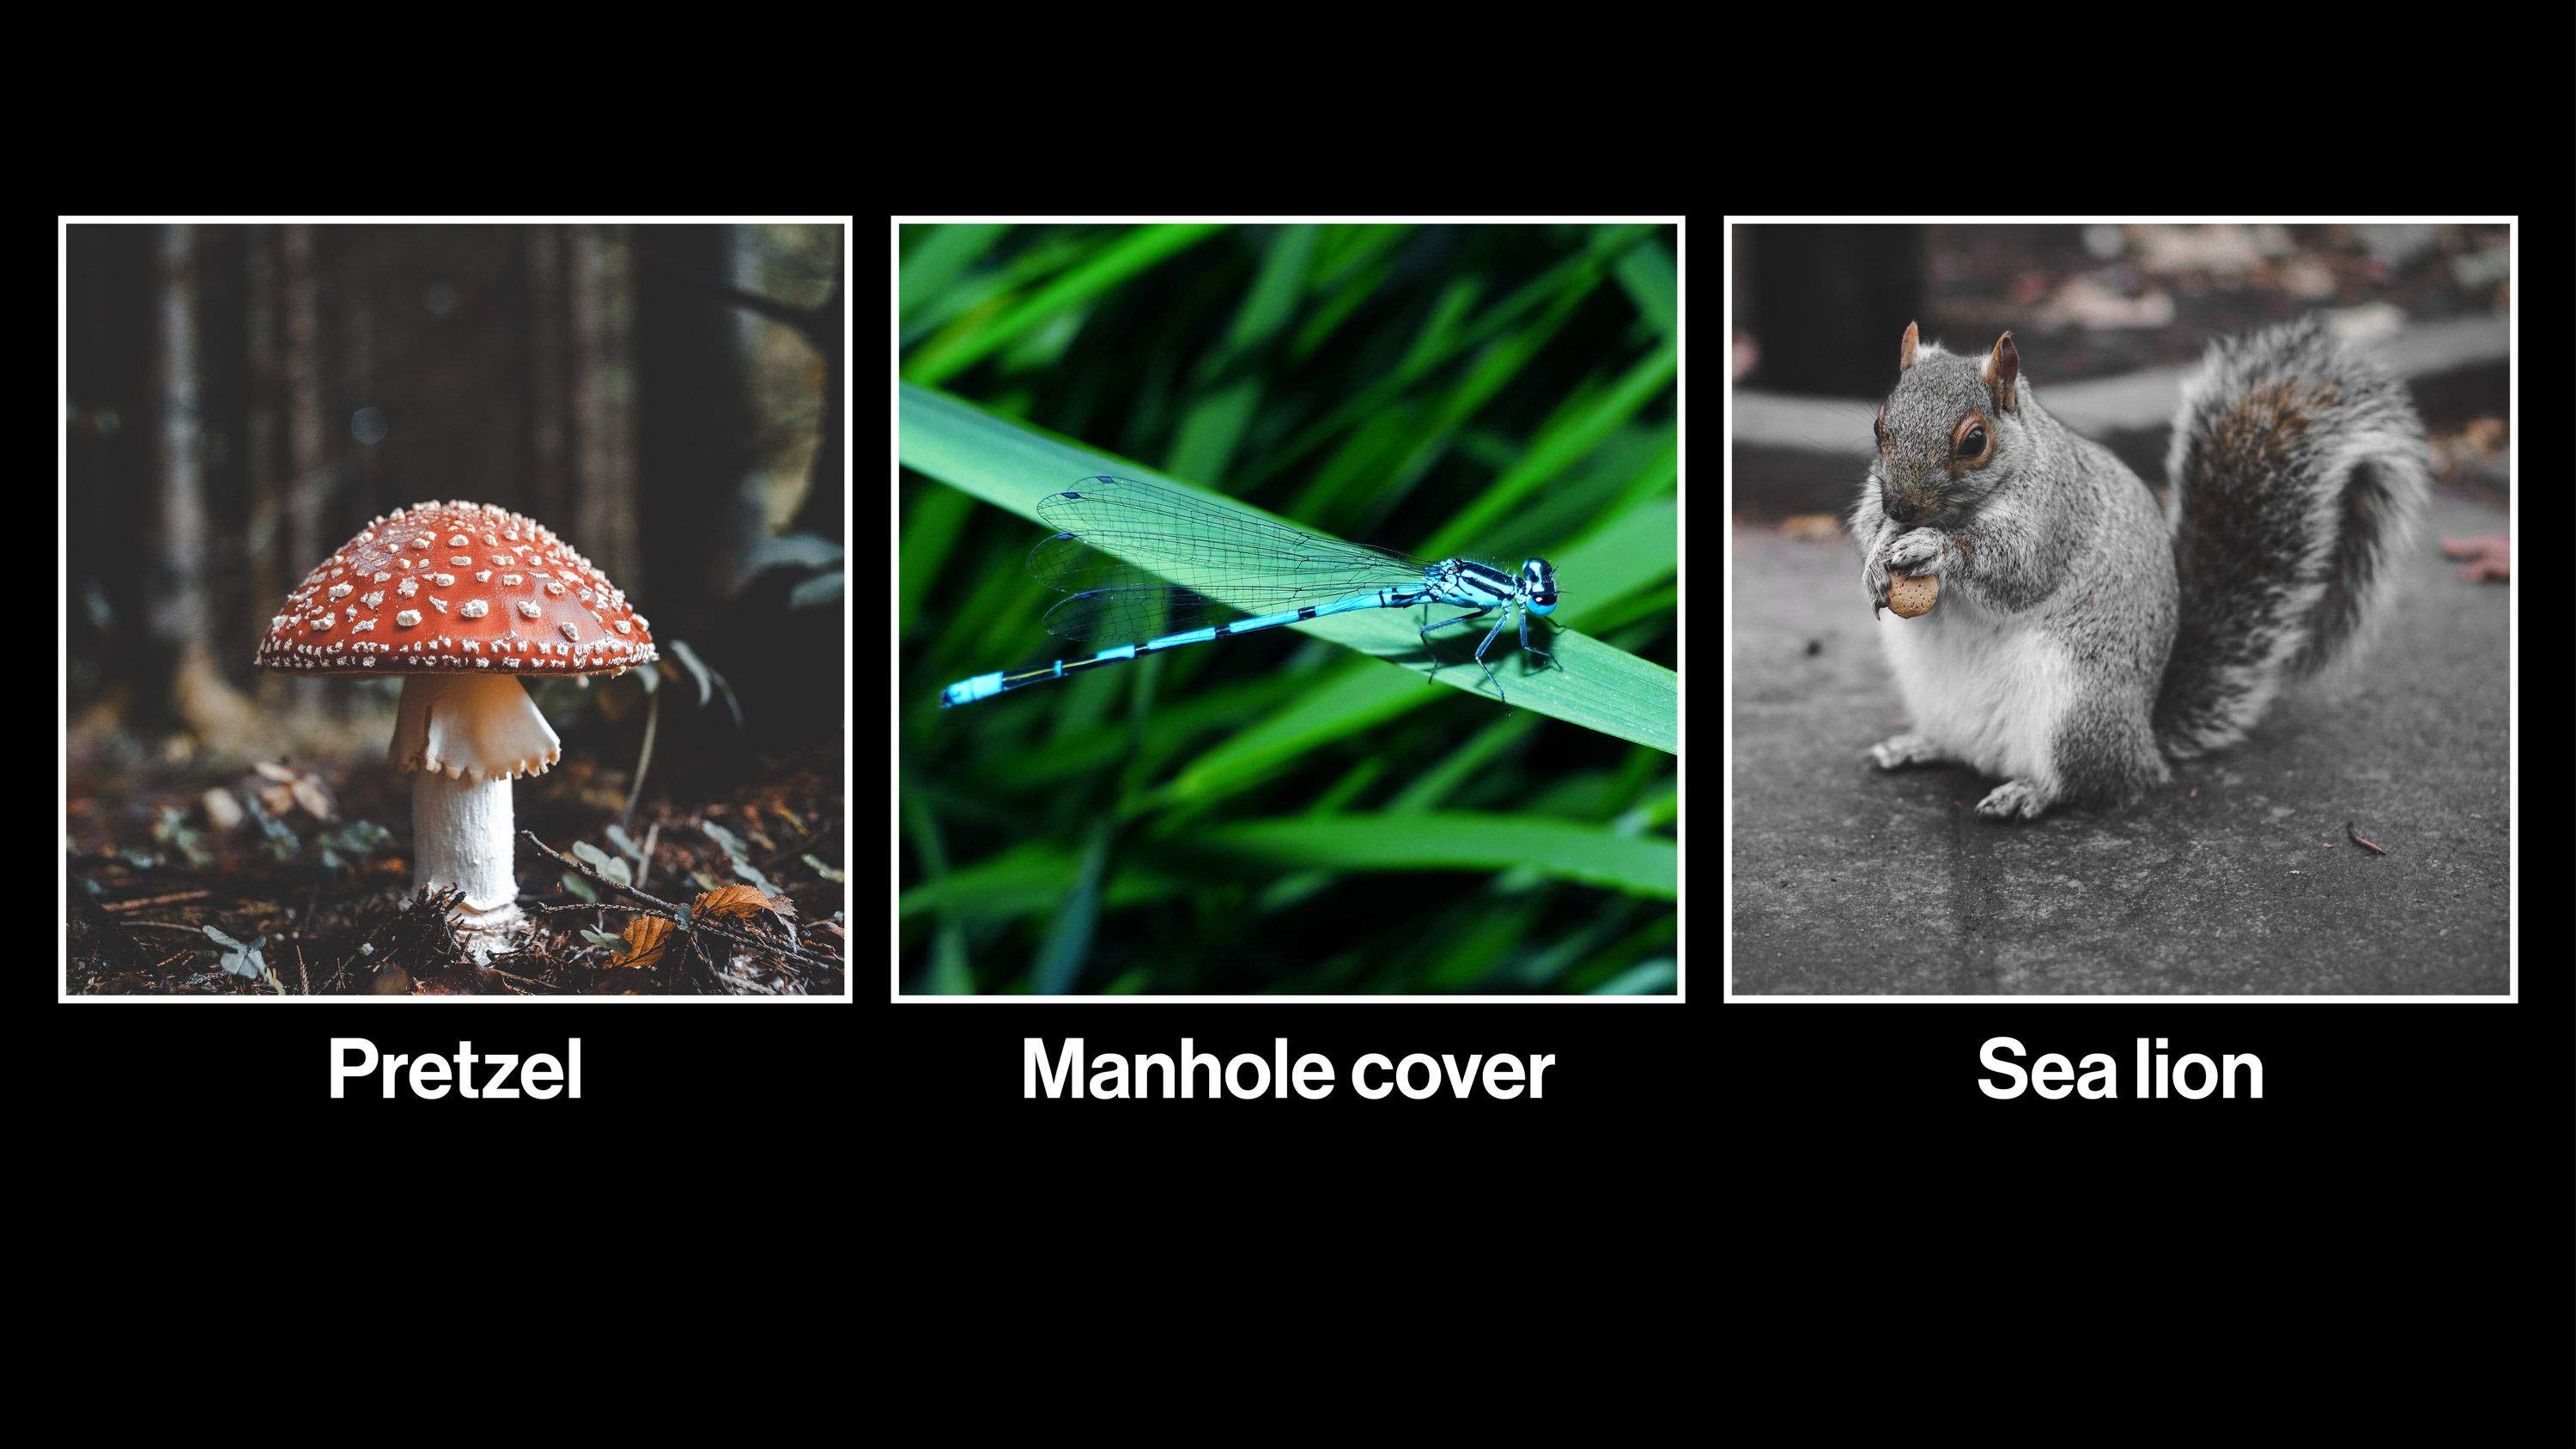 photograph showing a mushroom, dragonfly, and squirrel, all mislabeled as pretzel, manhole cover and sea lion